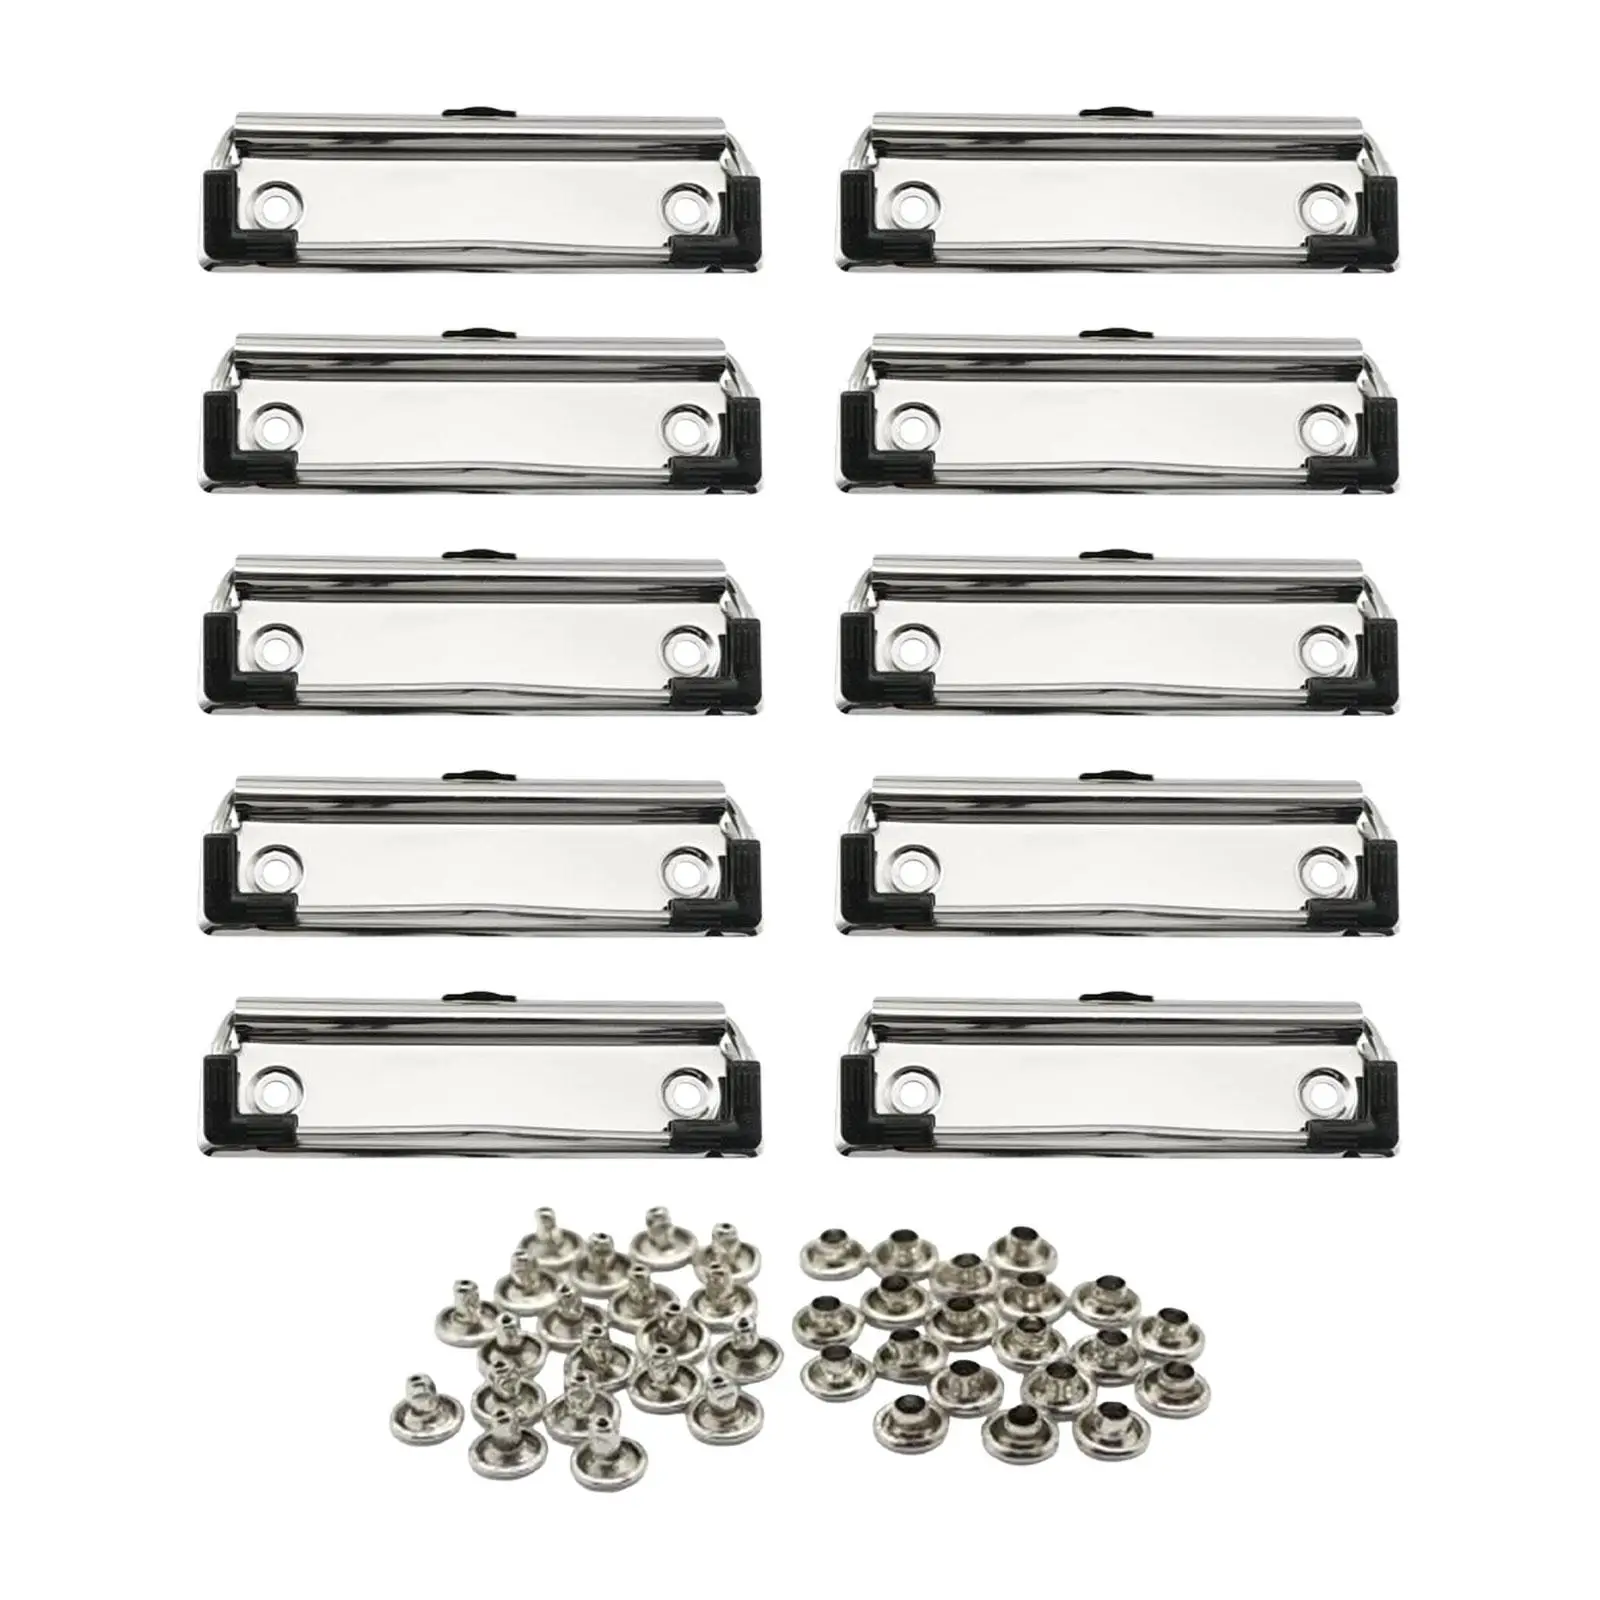 10x Office Low Profile Clipboard Clips Office Supplies Stationery Plate Holder Metal Clipboard Clips for Business School Office